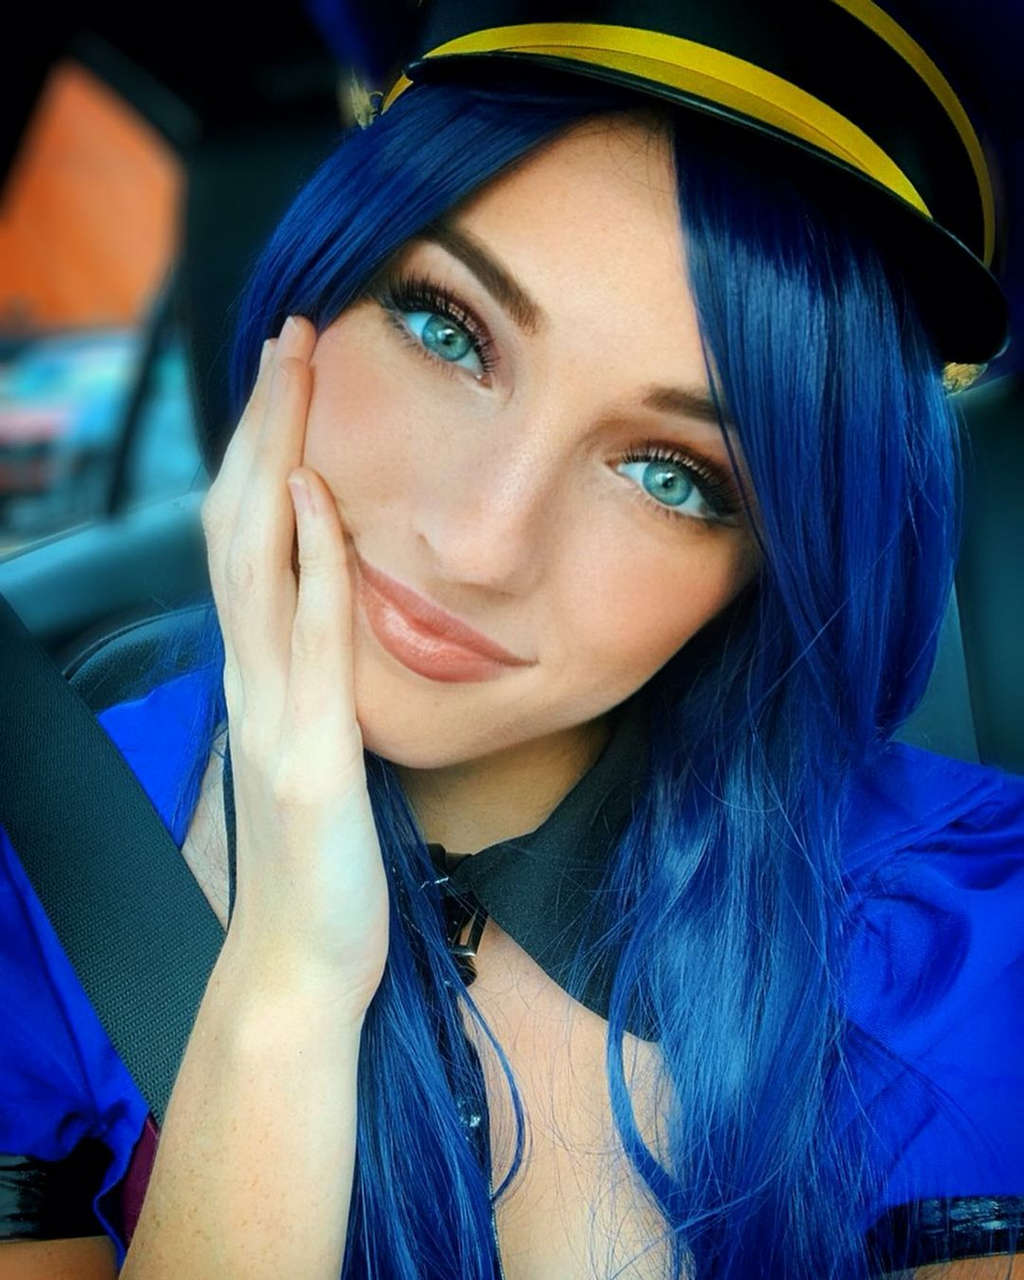 Officer Caitlyn From League Of Legends By Michaela Lee